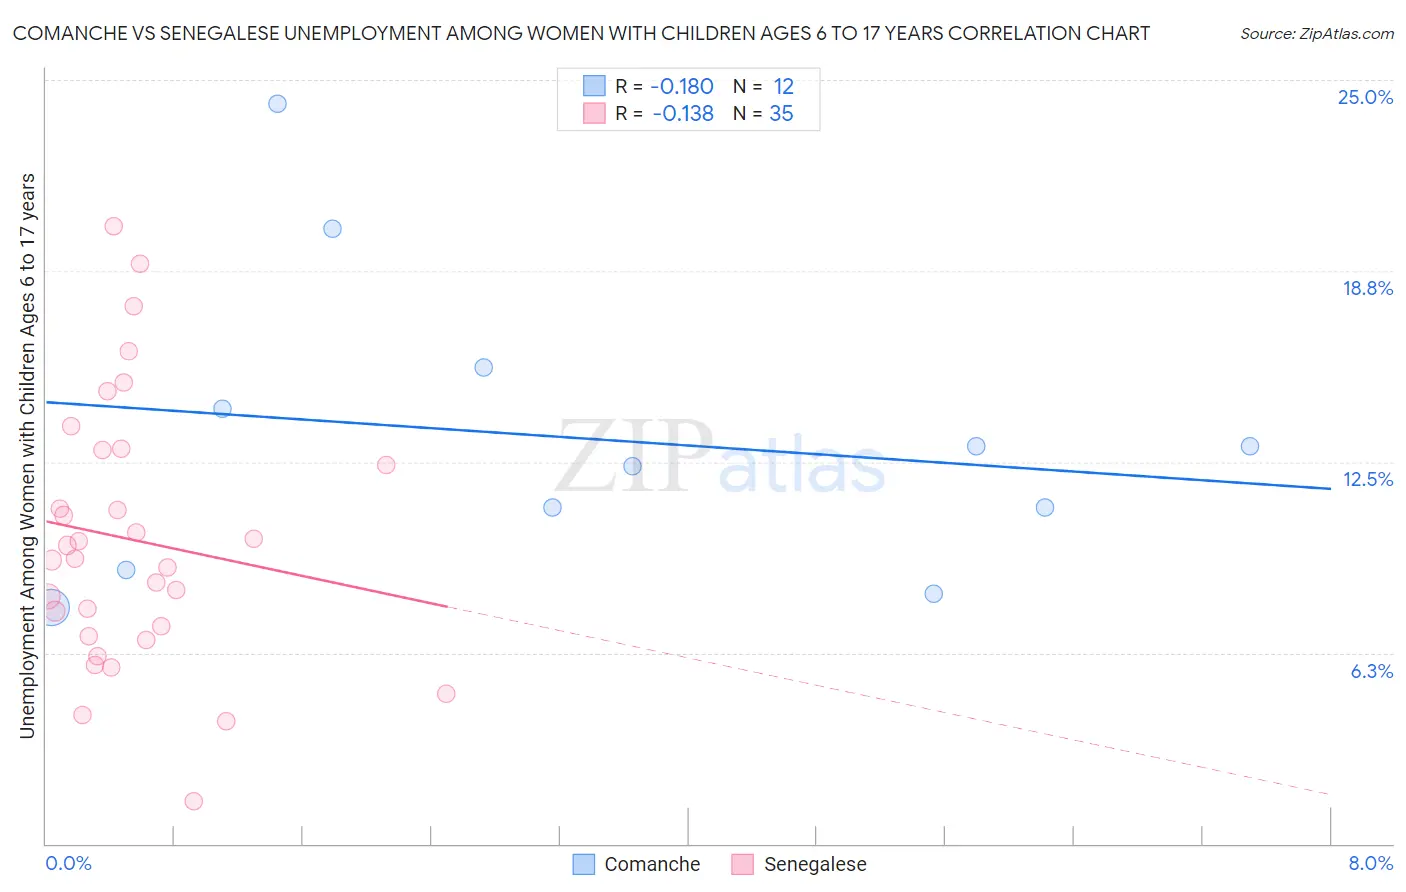 Comanche vs Senegalese Unemployment Among Women with Children Ages 6 to 17 years